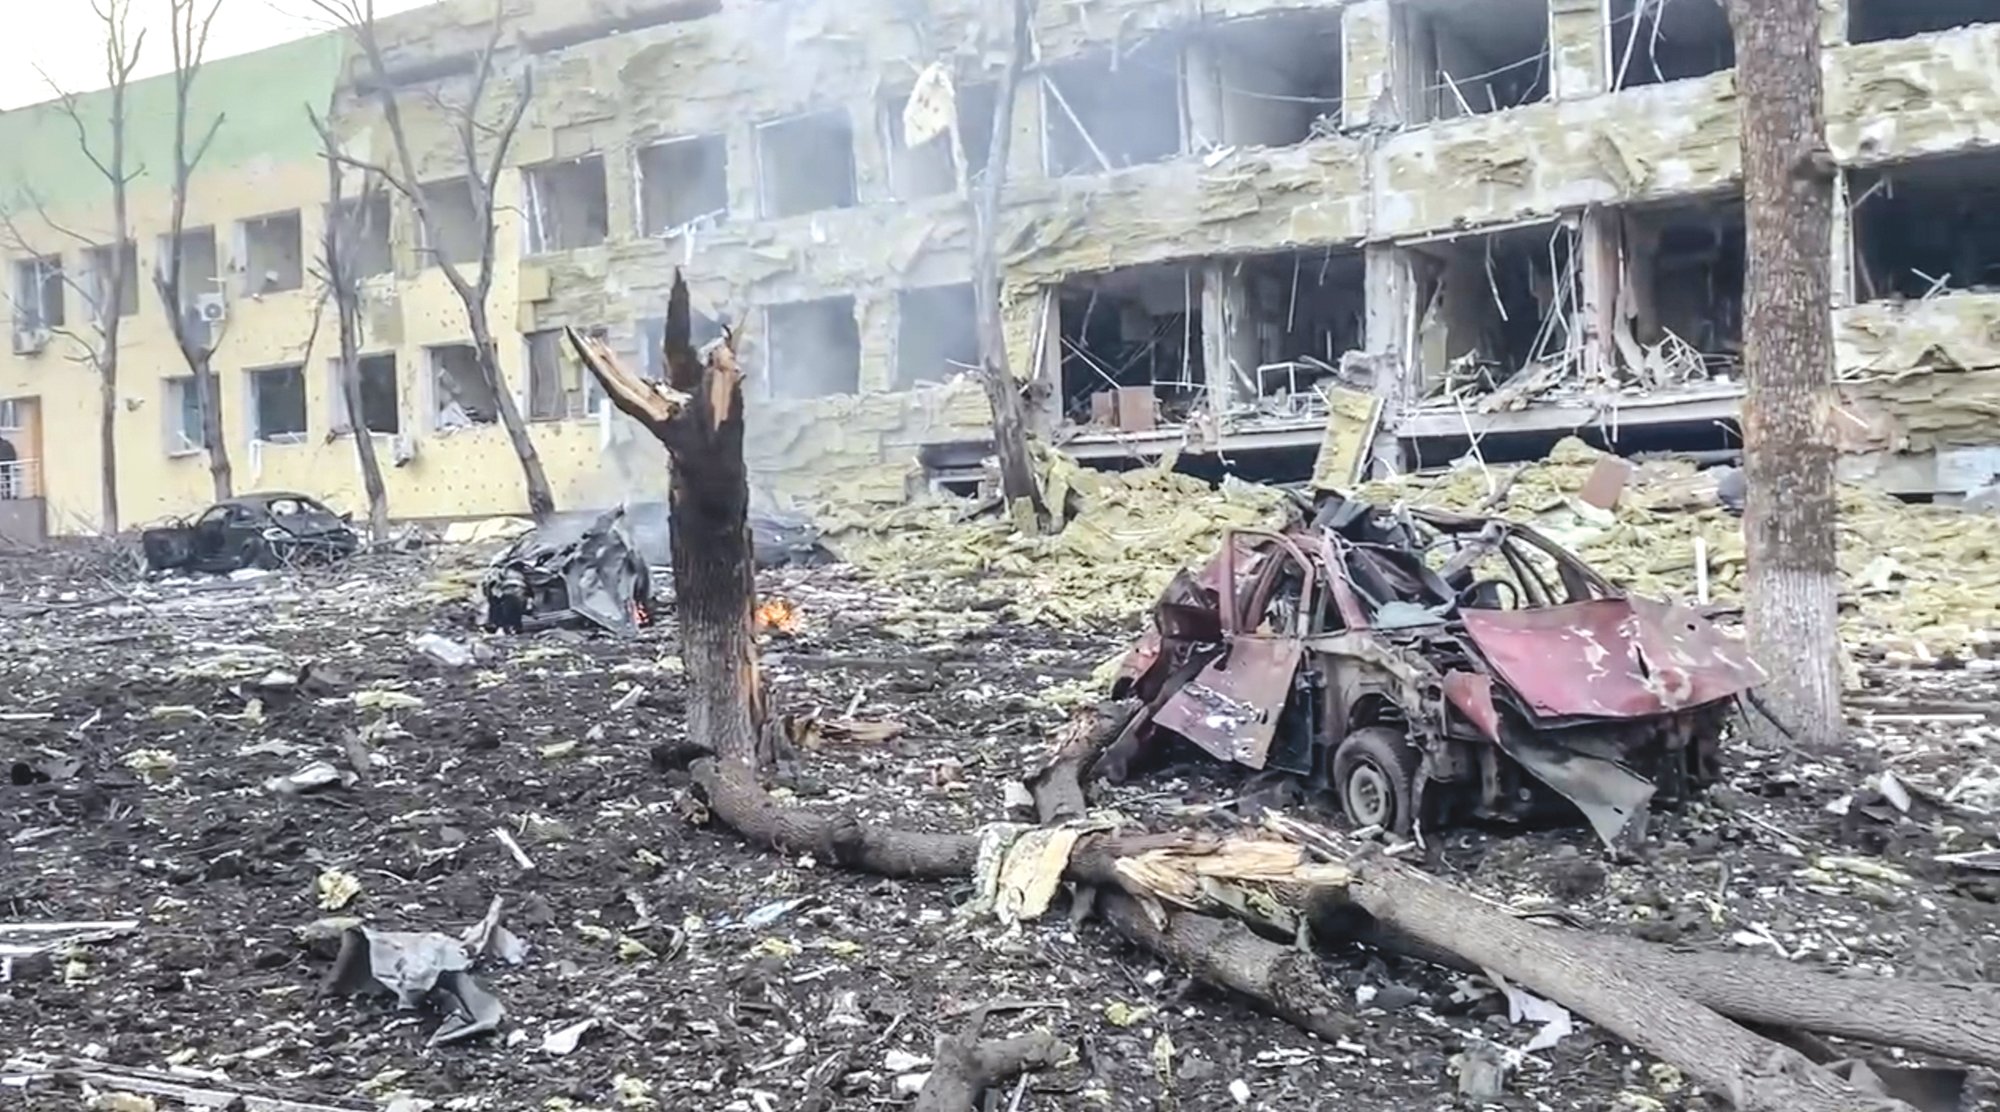 Airstrike hits Ukraine maternity hospital, officials say | The Sumter Item